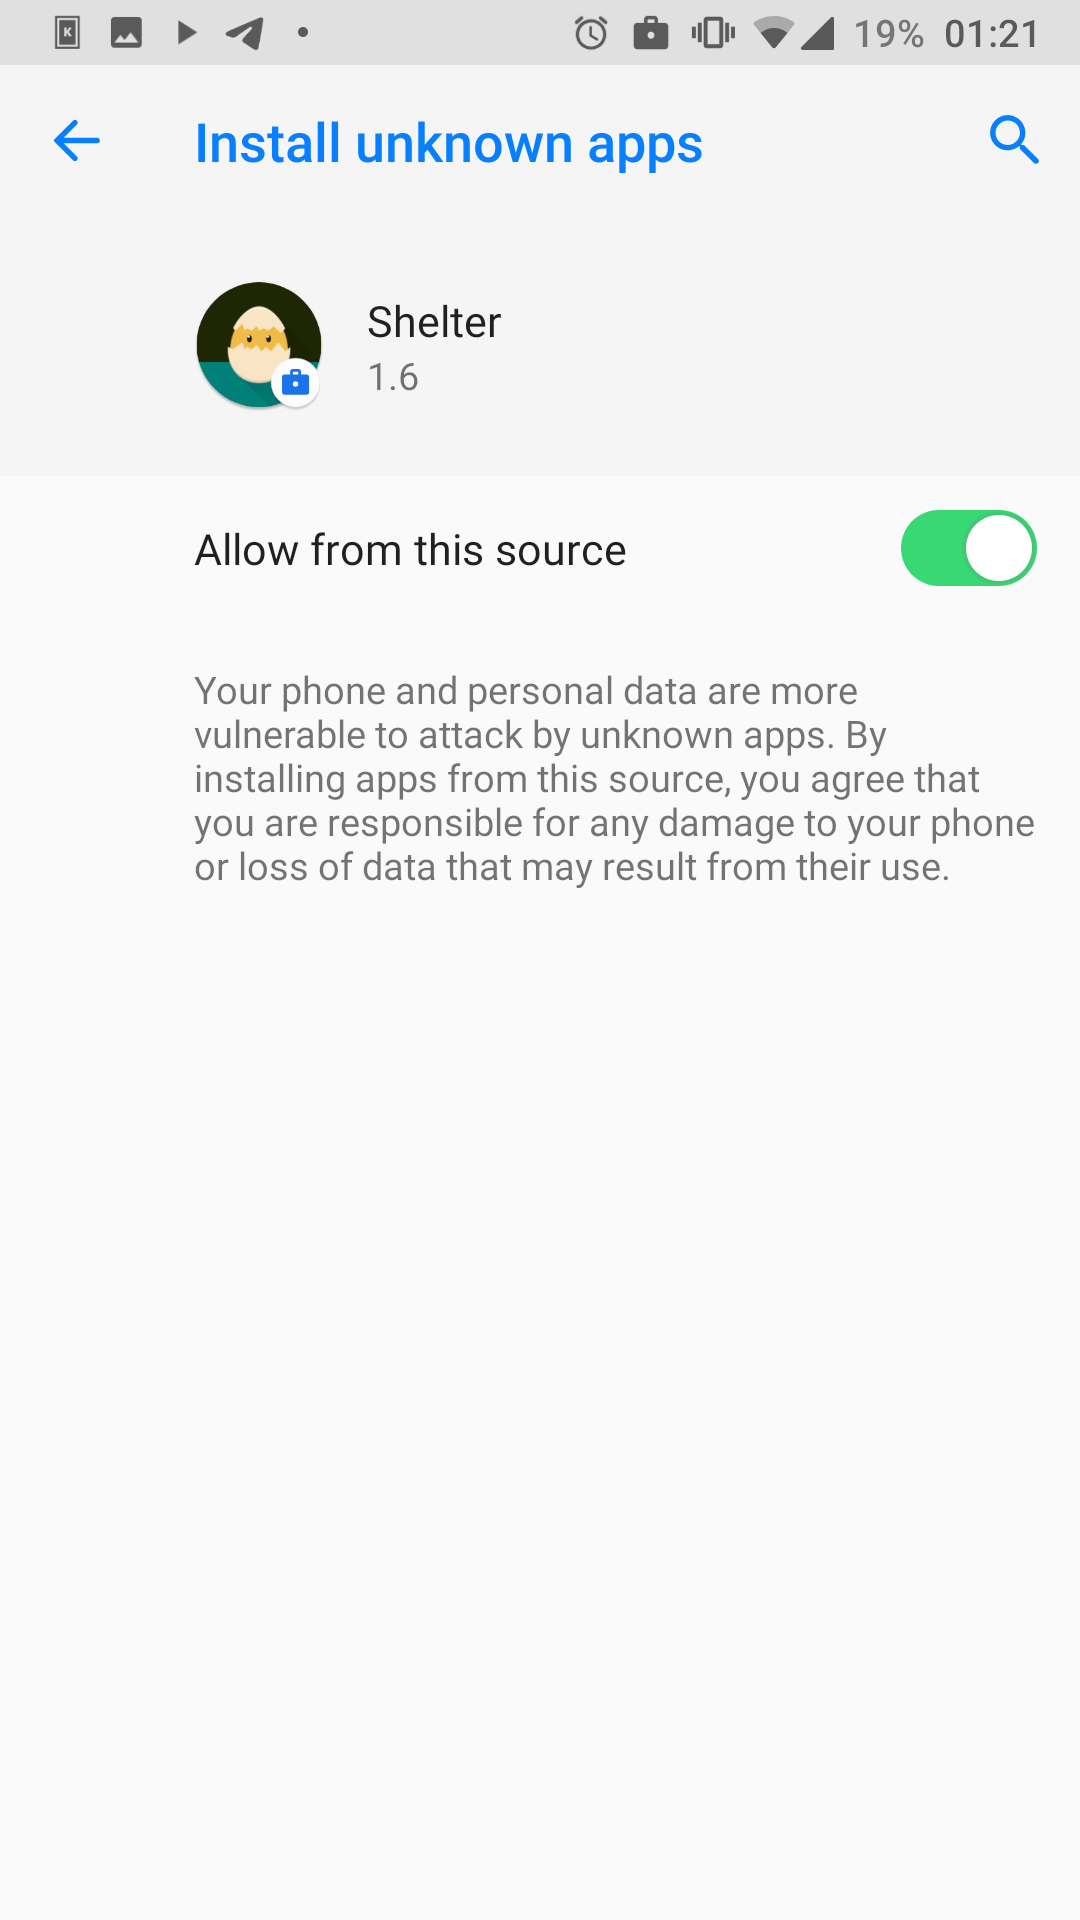 Install unknown apps screen